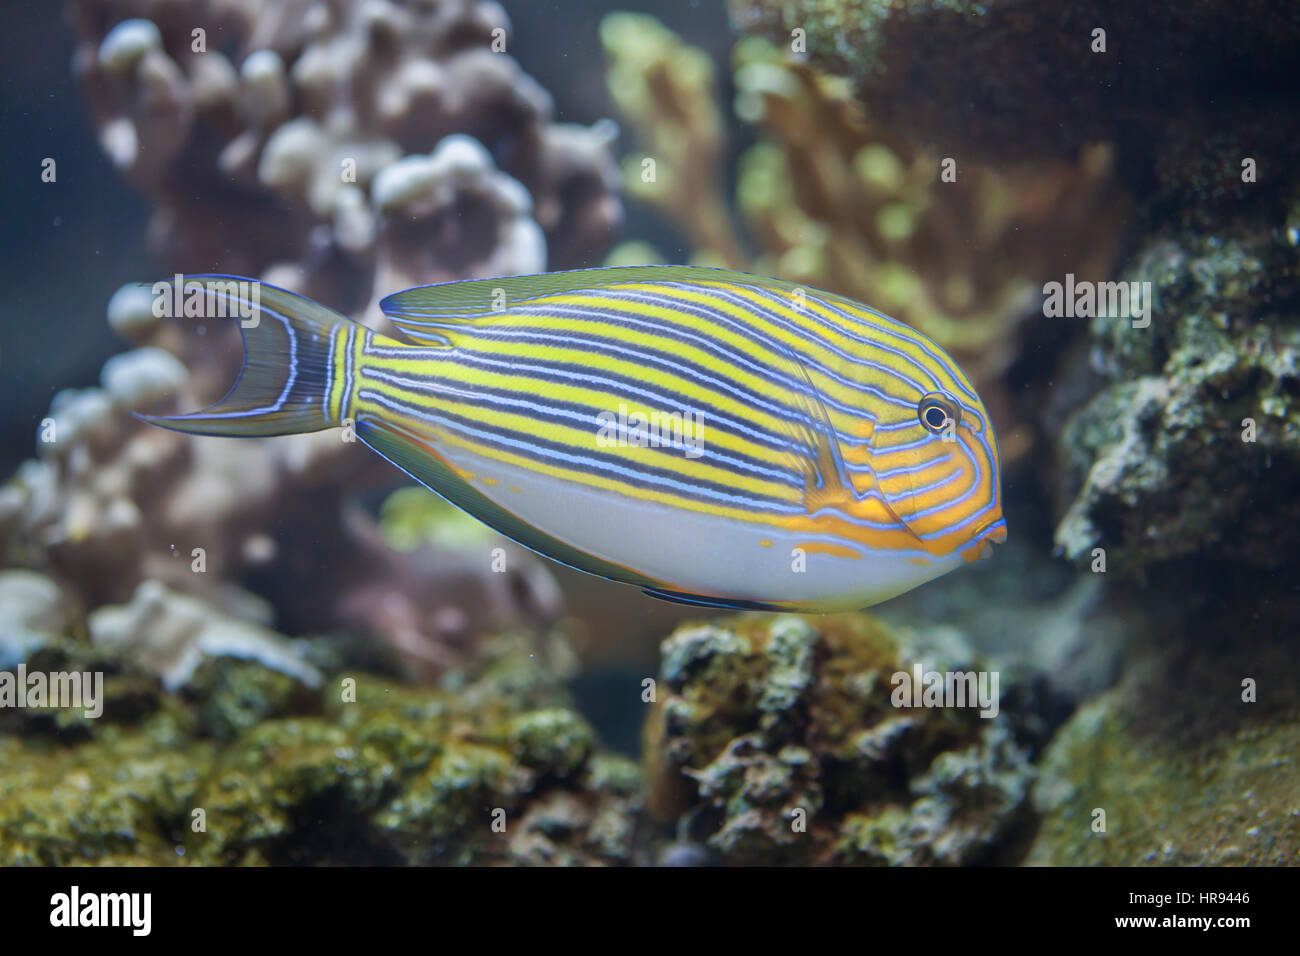 Blue banded surgeonfish (Acanthurus lineatus), also known as the zebra surgeonfish. Stock Photo